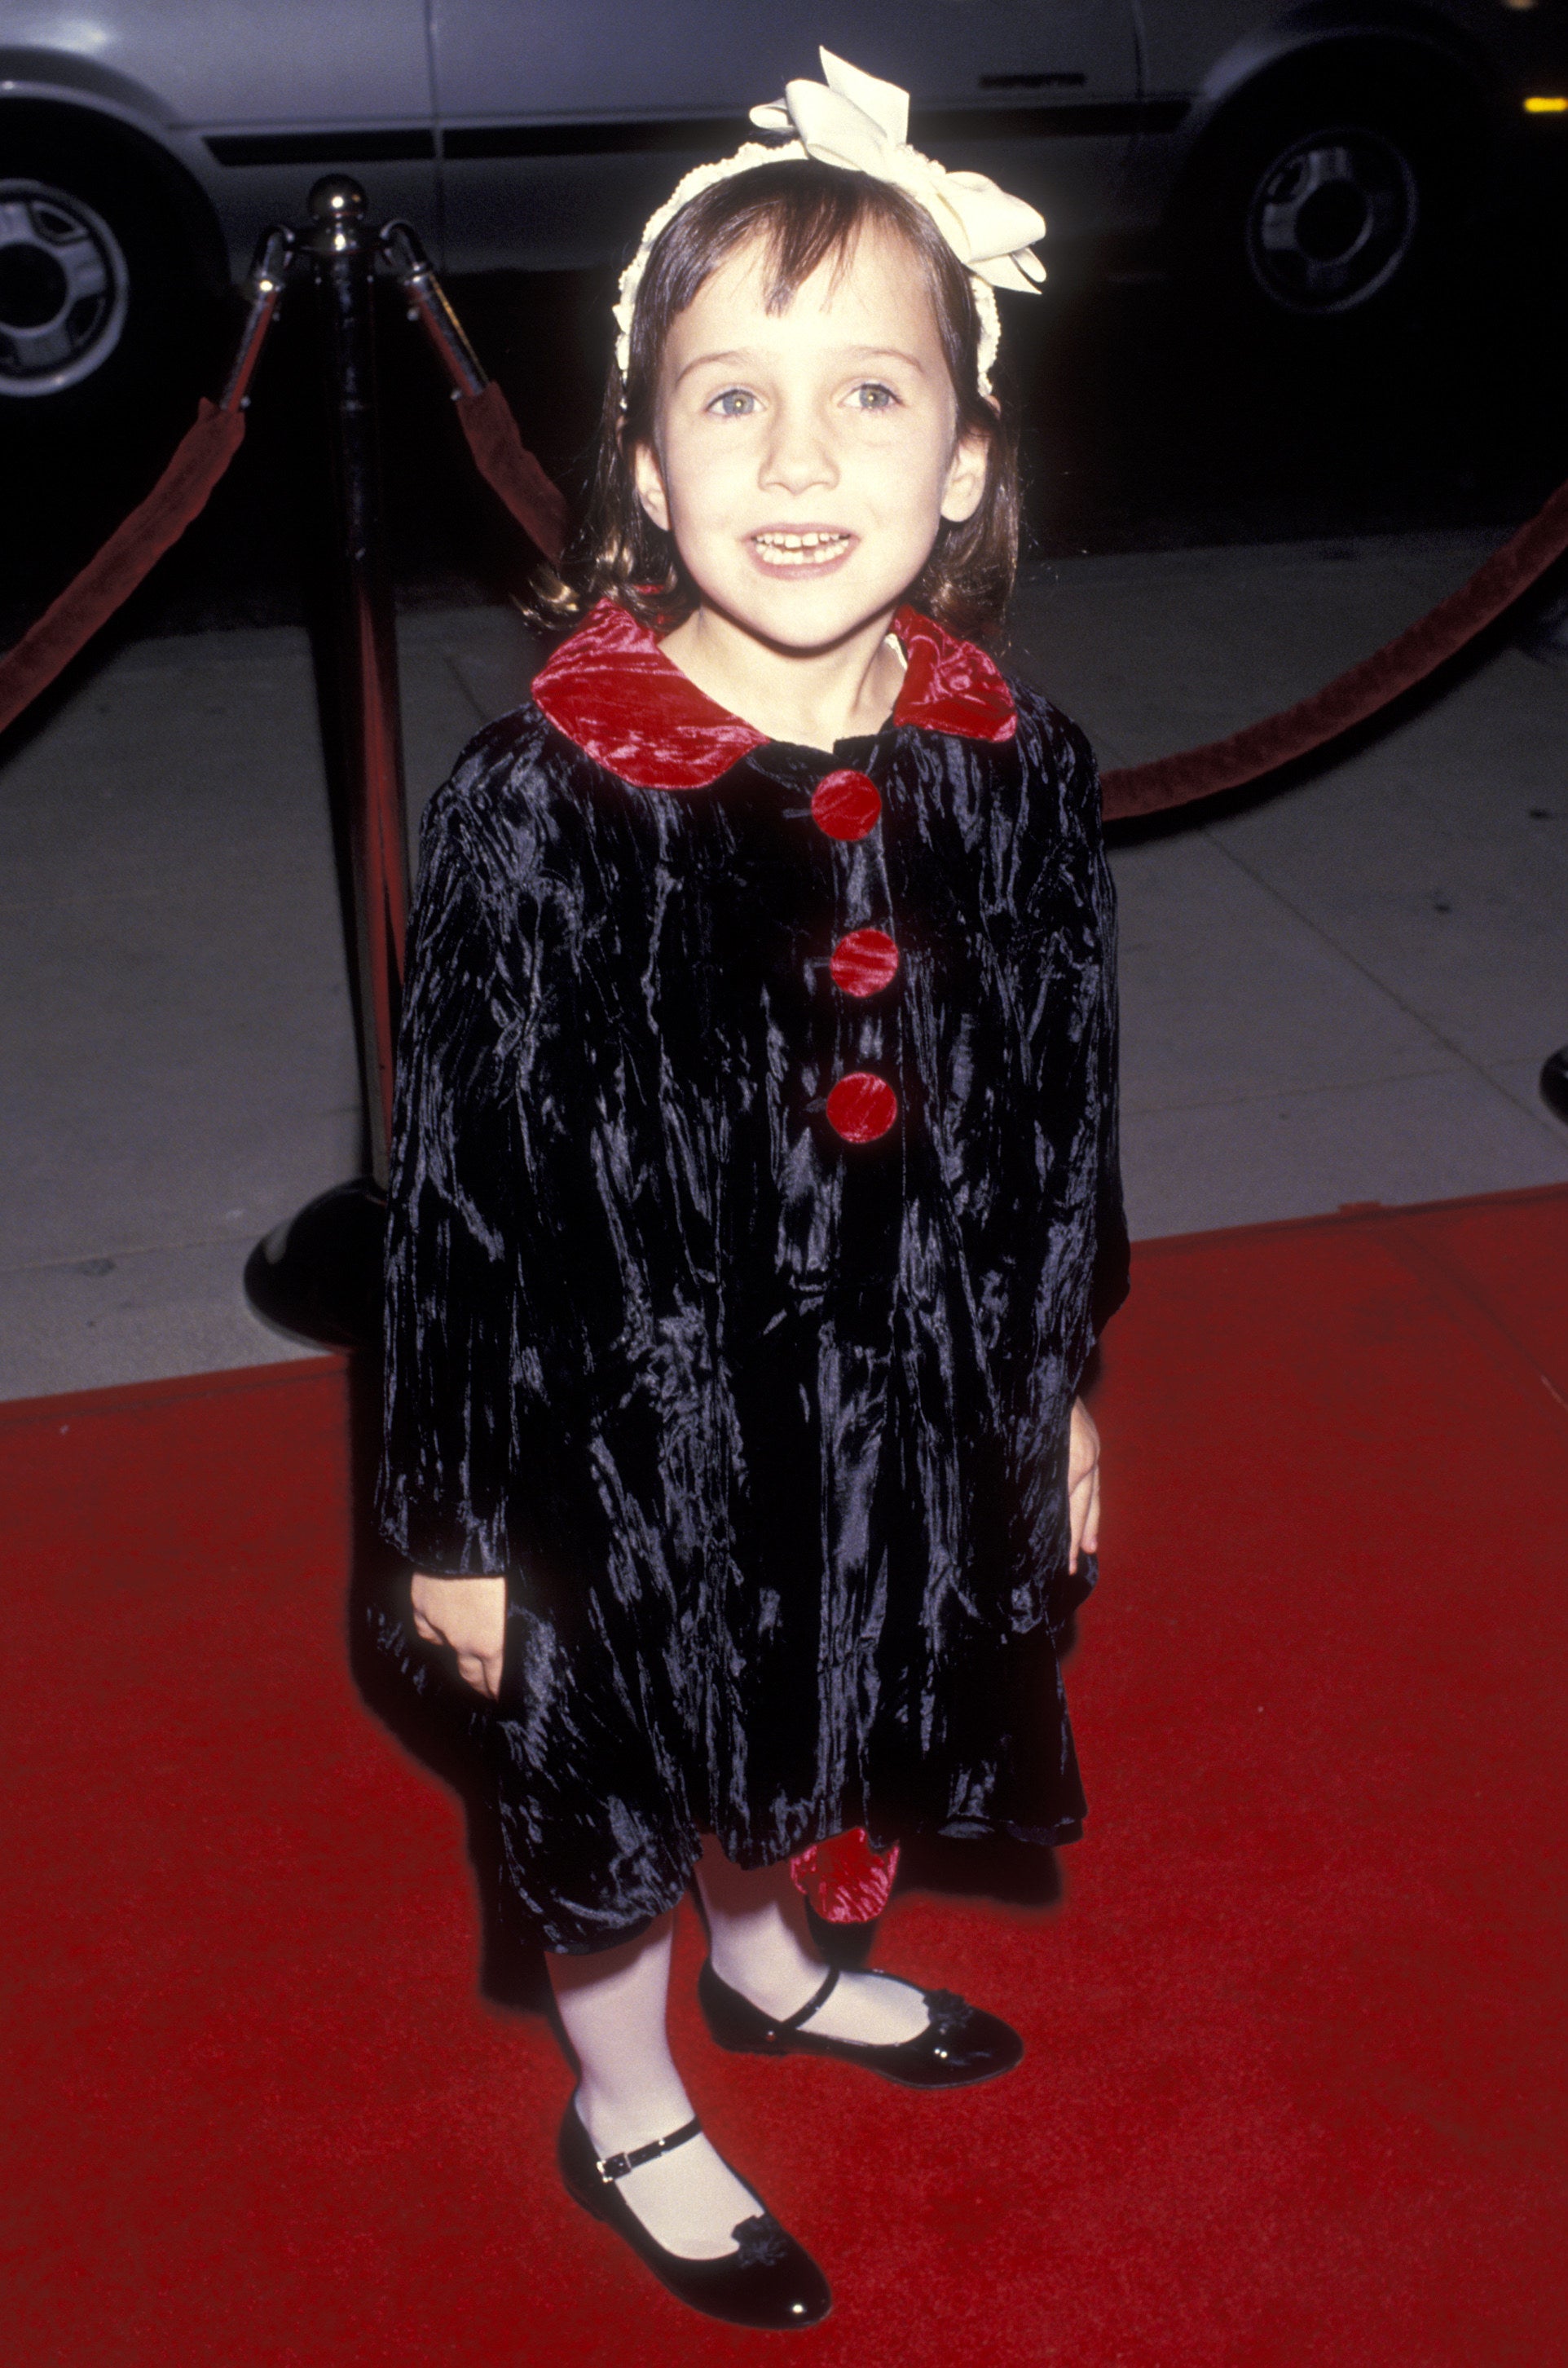 mara as a child on the red carpet